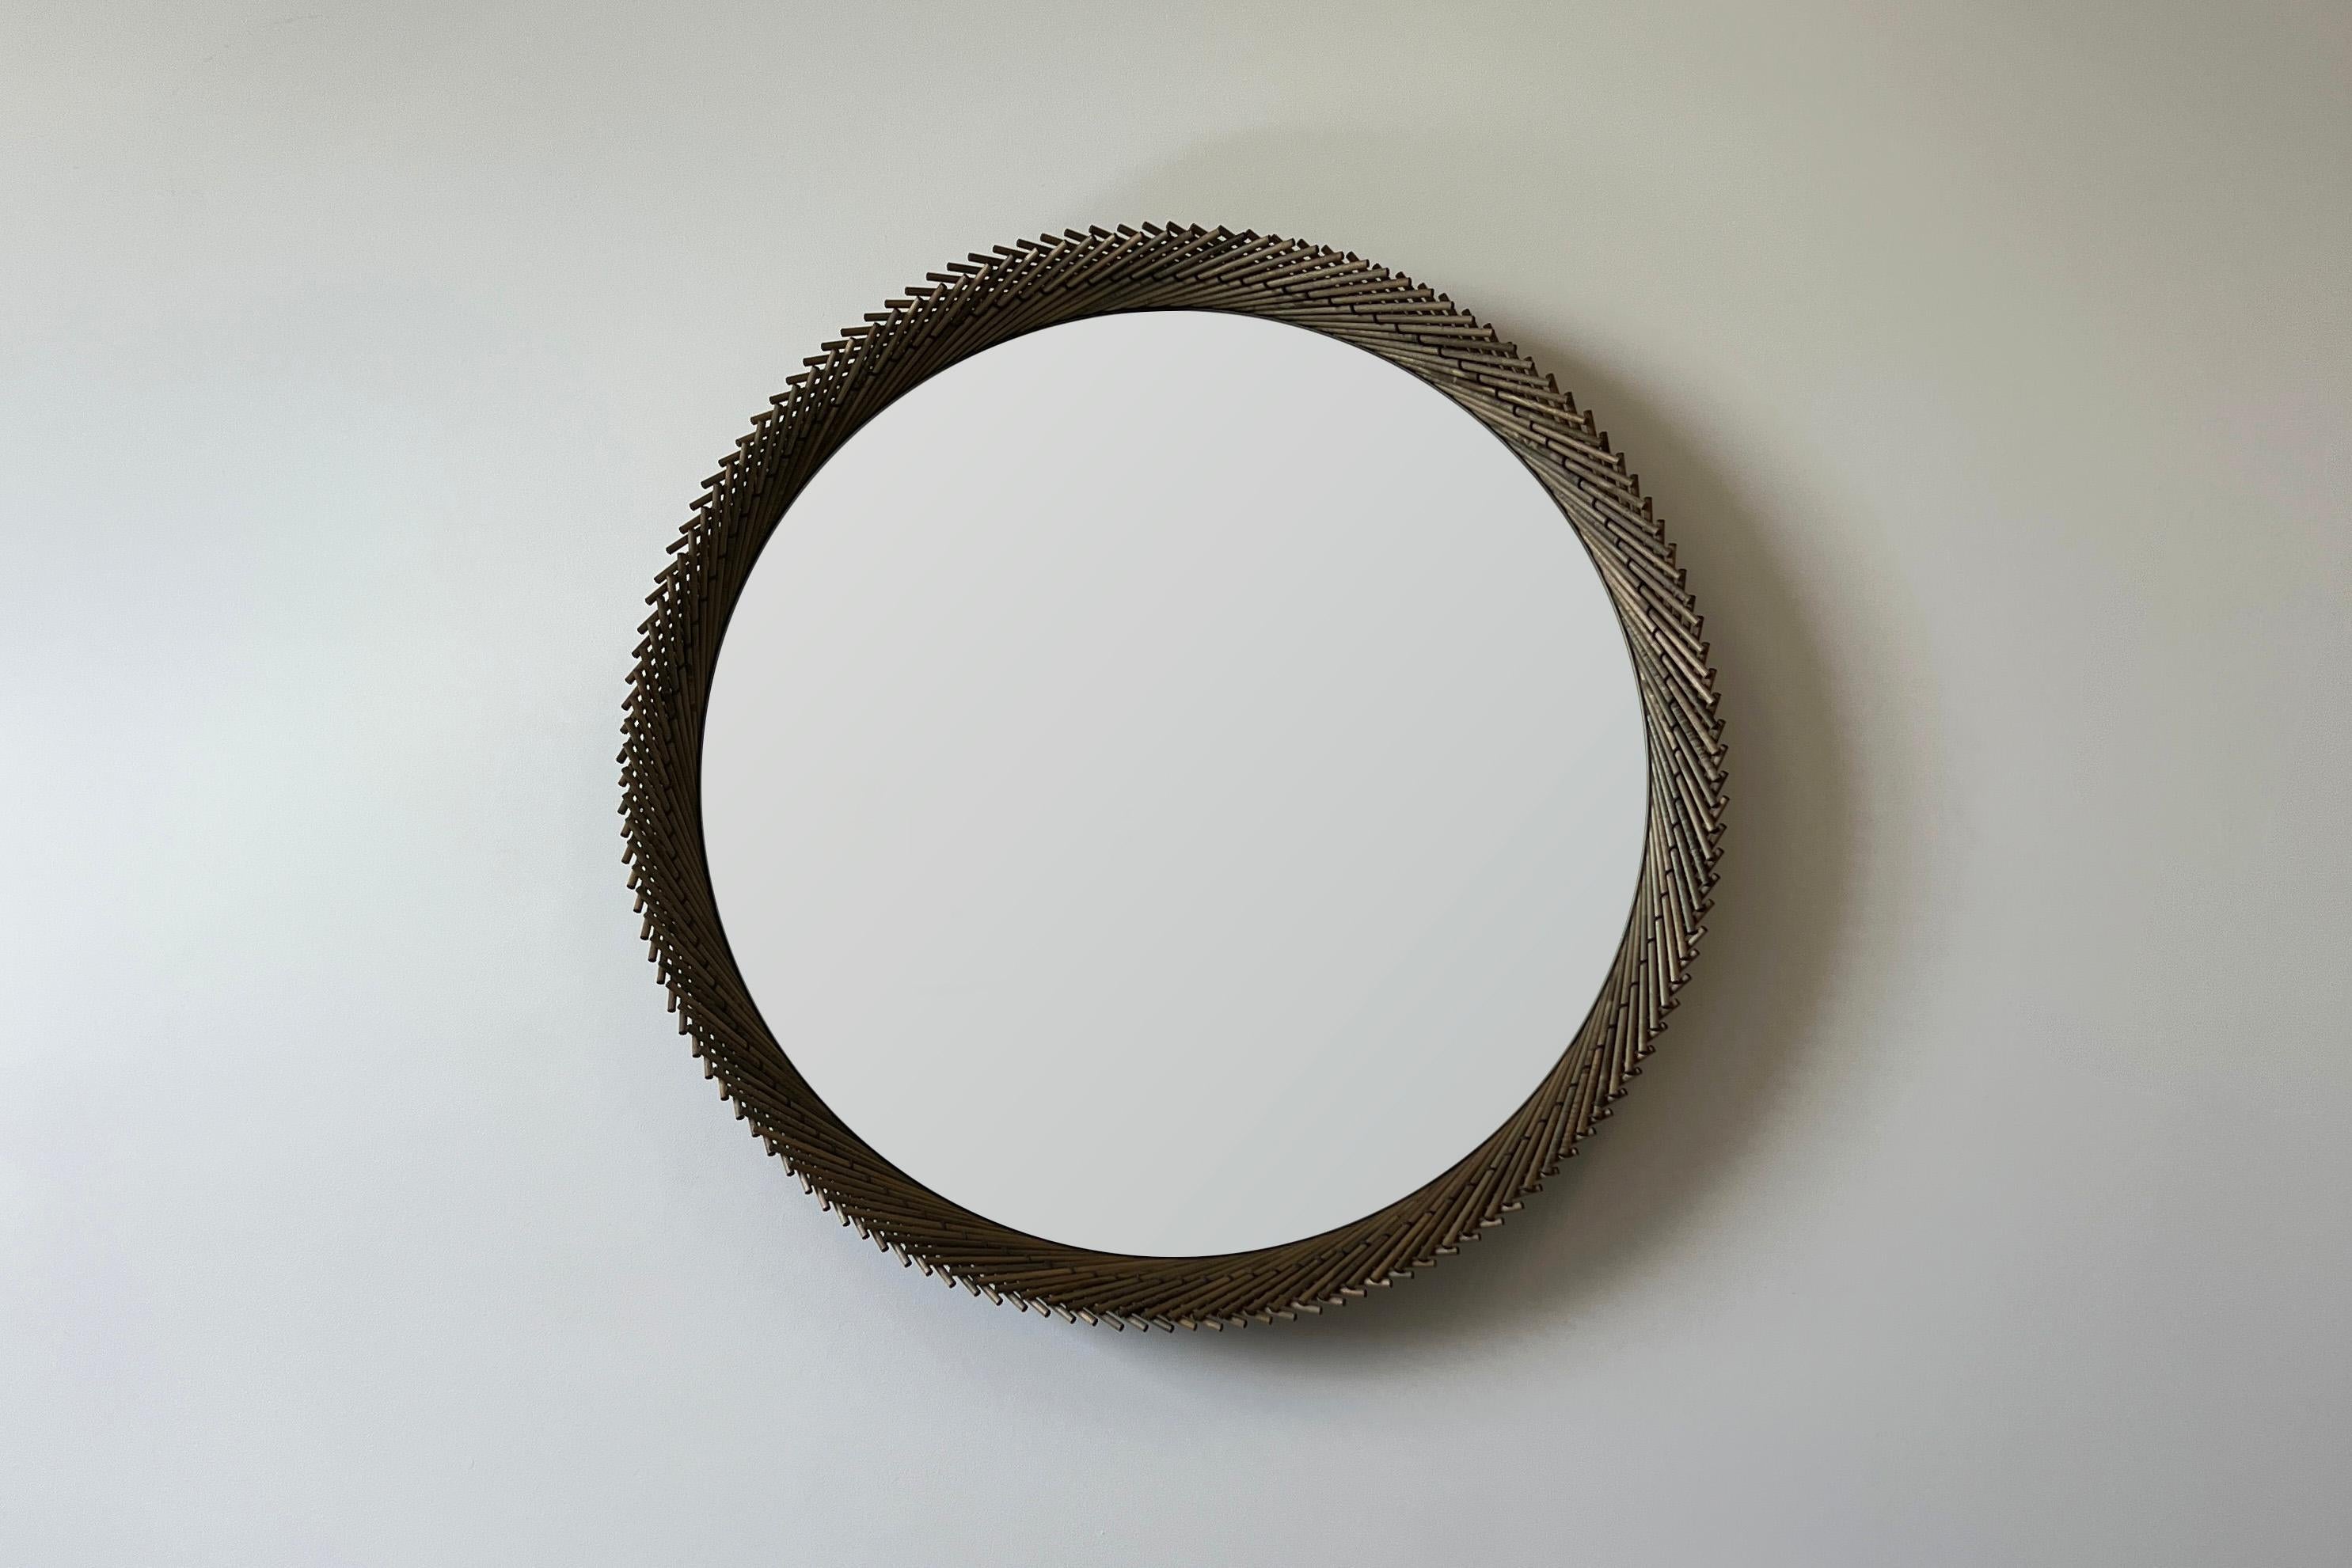 Bleached Mooda Round Mirror 30 / Oxidized Maple Wood, Clear Mirror by INDO- For Sale